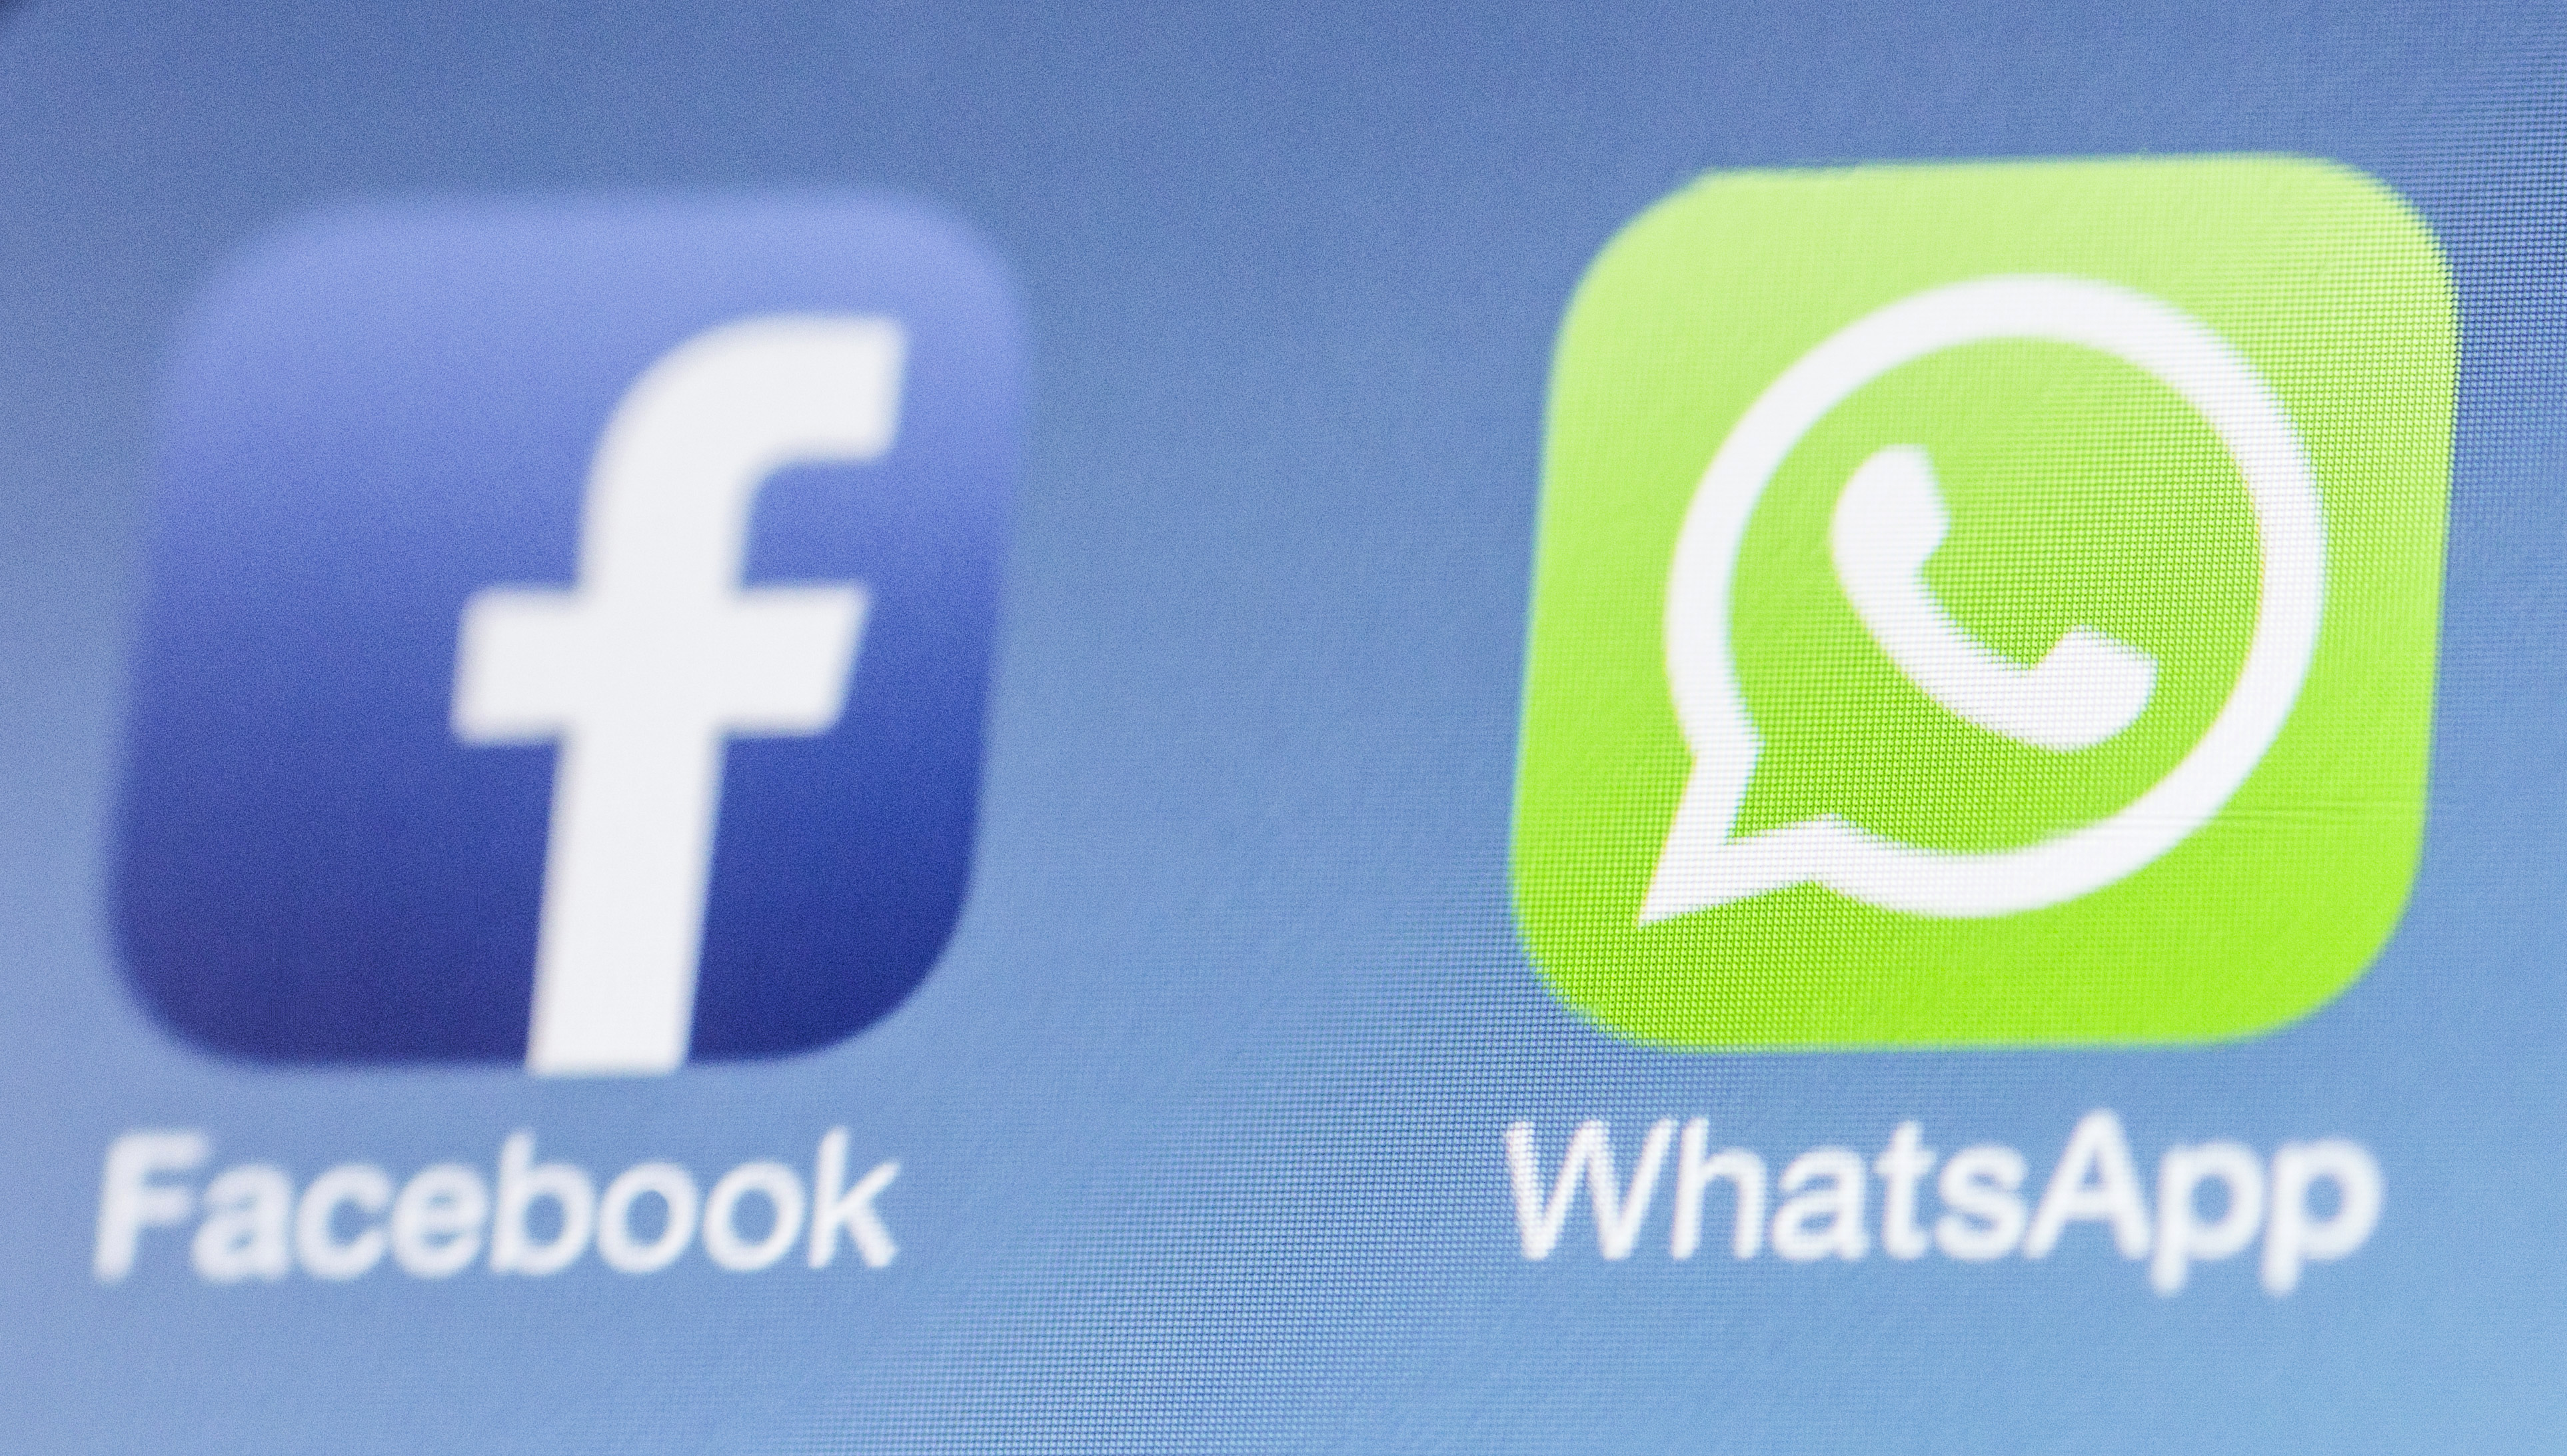 Facebook next to the WhatsApp logo on iPhone on February 25, 2014 in Berlin, Germany. (Marie Waldmann—Photothek/Getty Images)